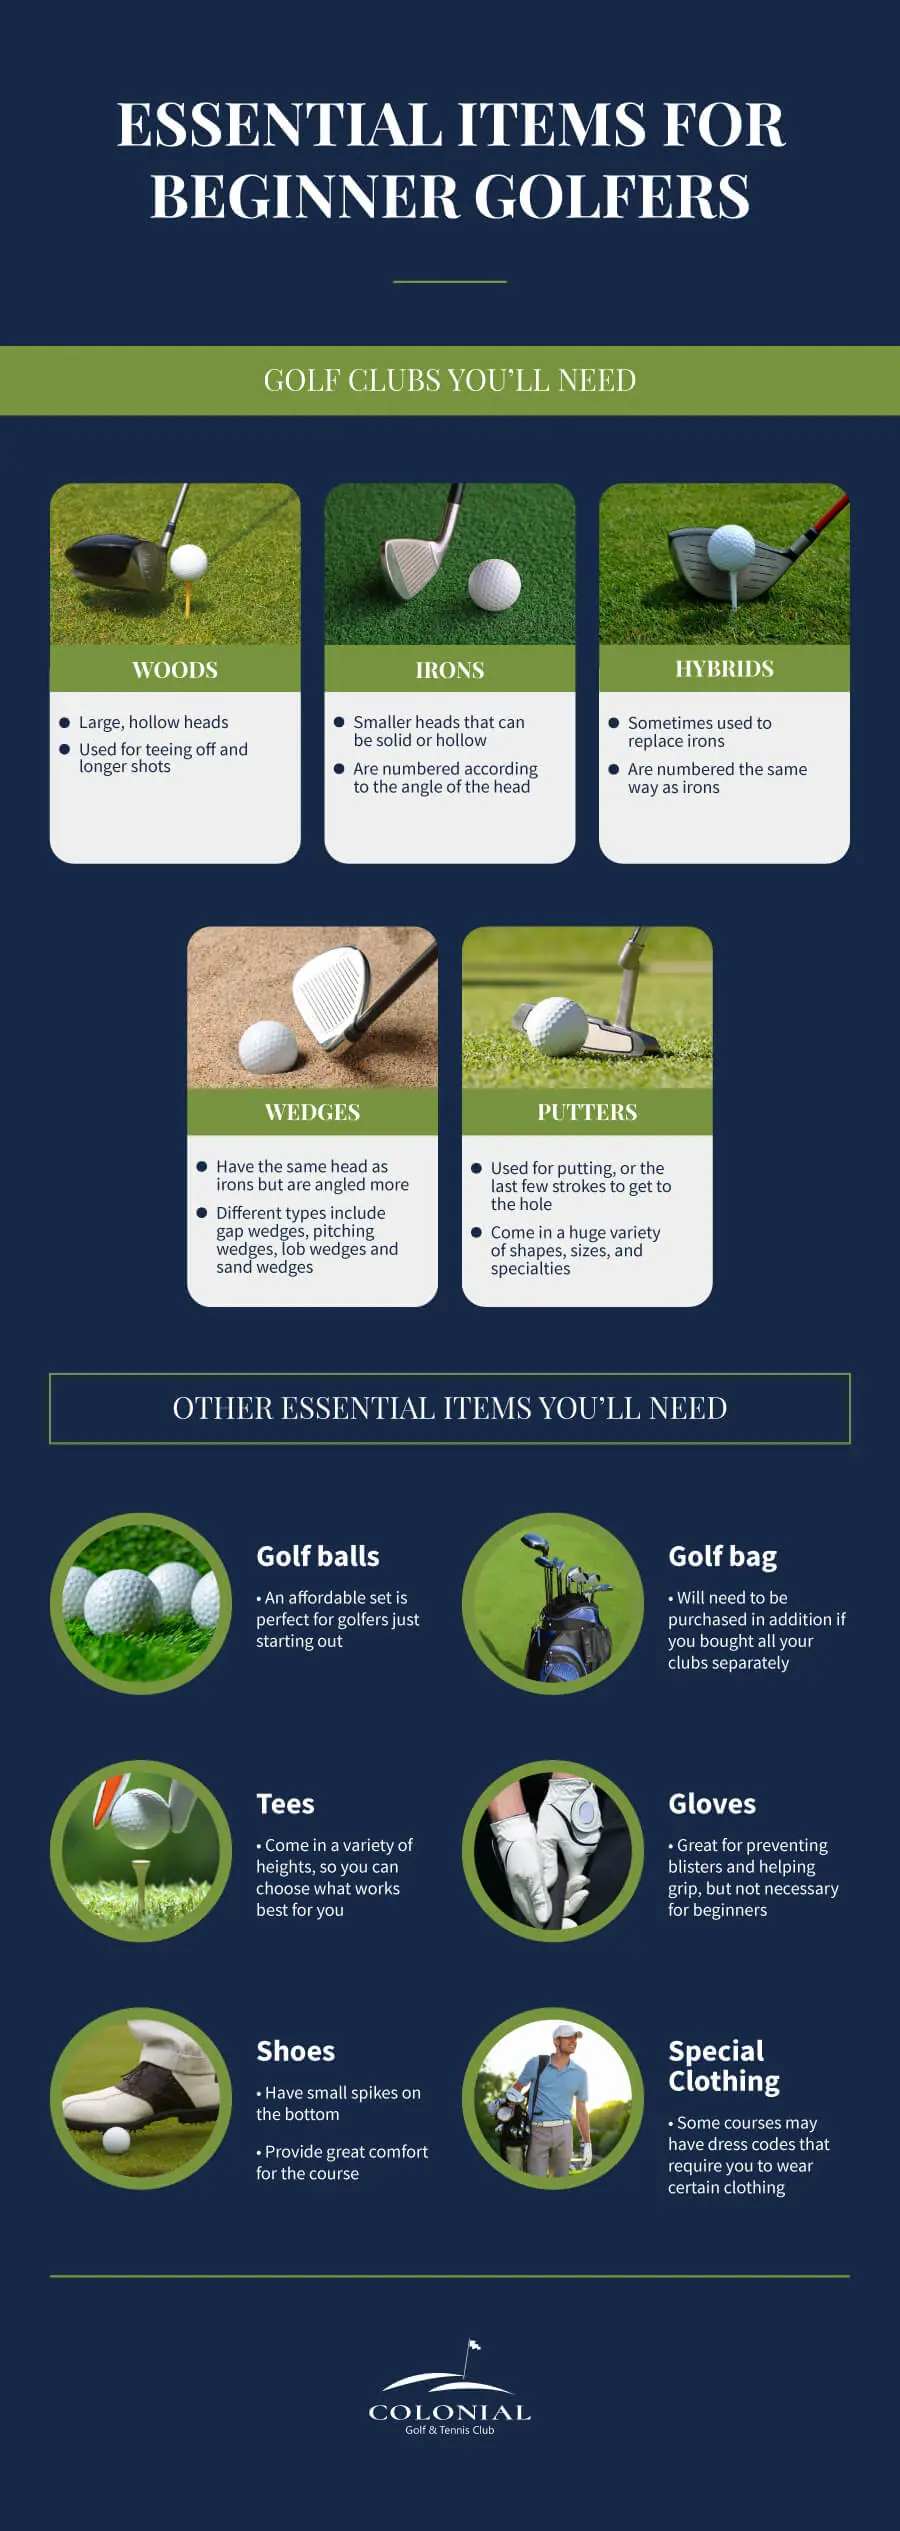 How Do You Play Golf? Everything You'll Need to Know